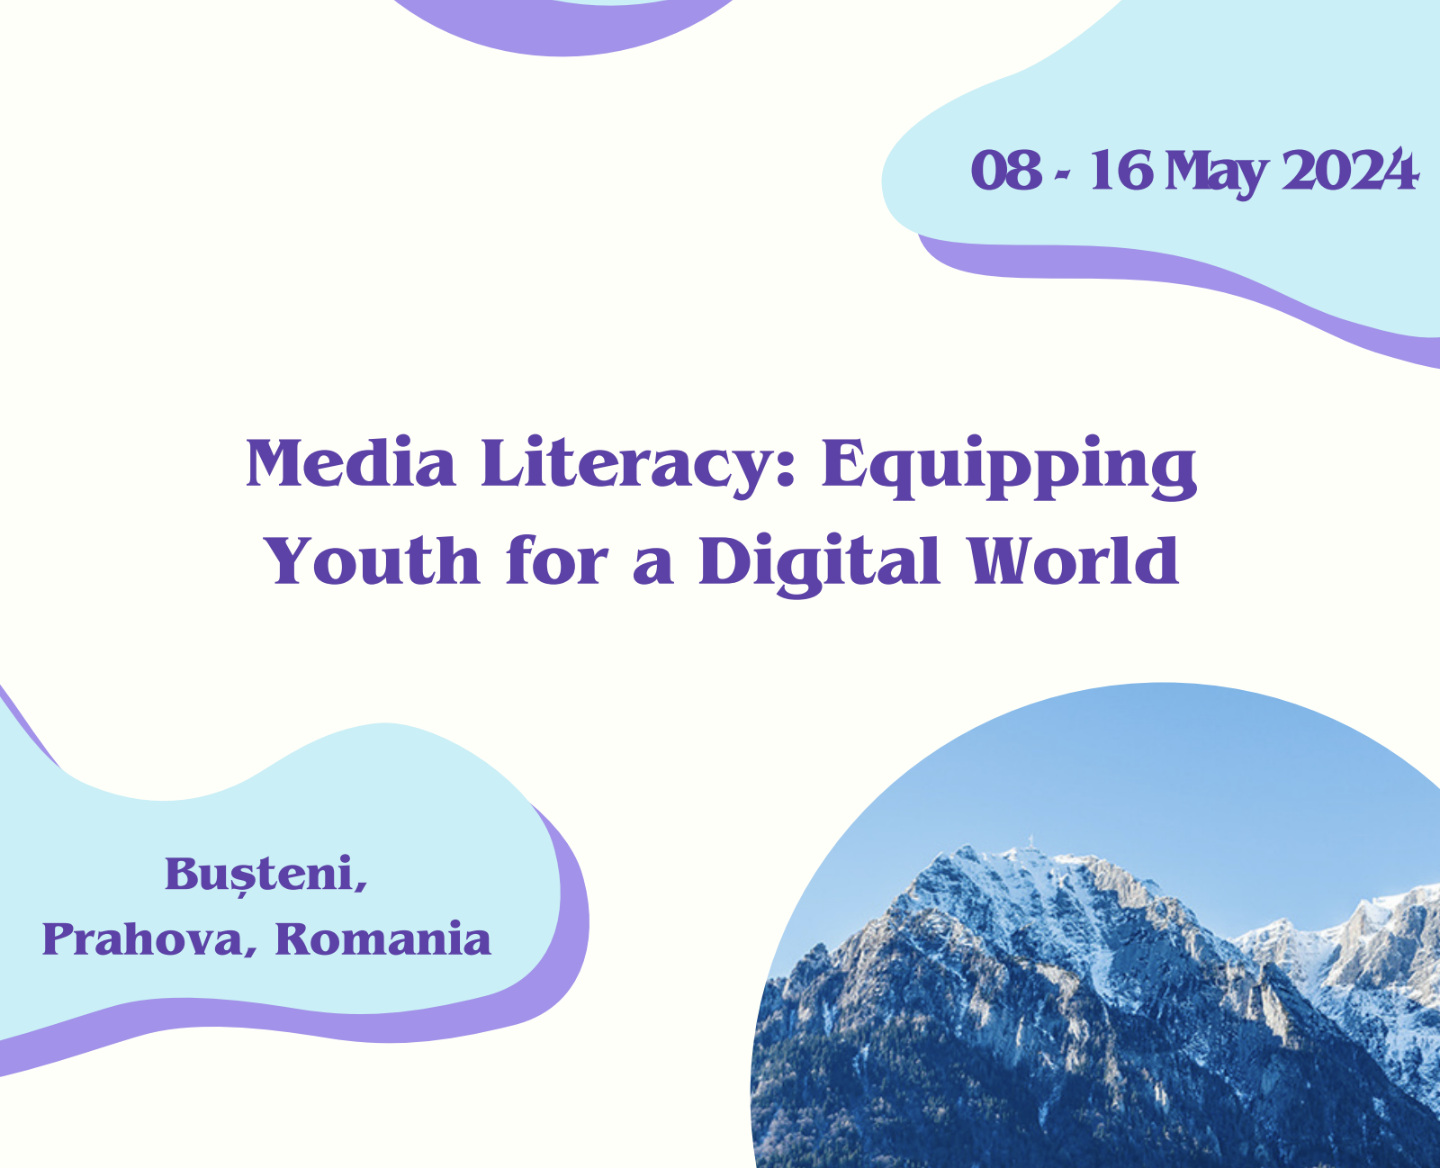 Media Literacy: Equipping Youth for a Digital World